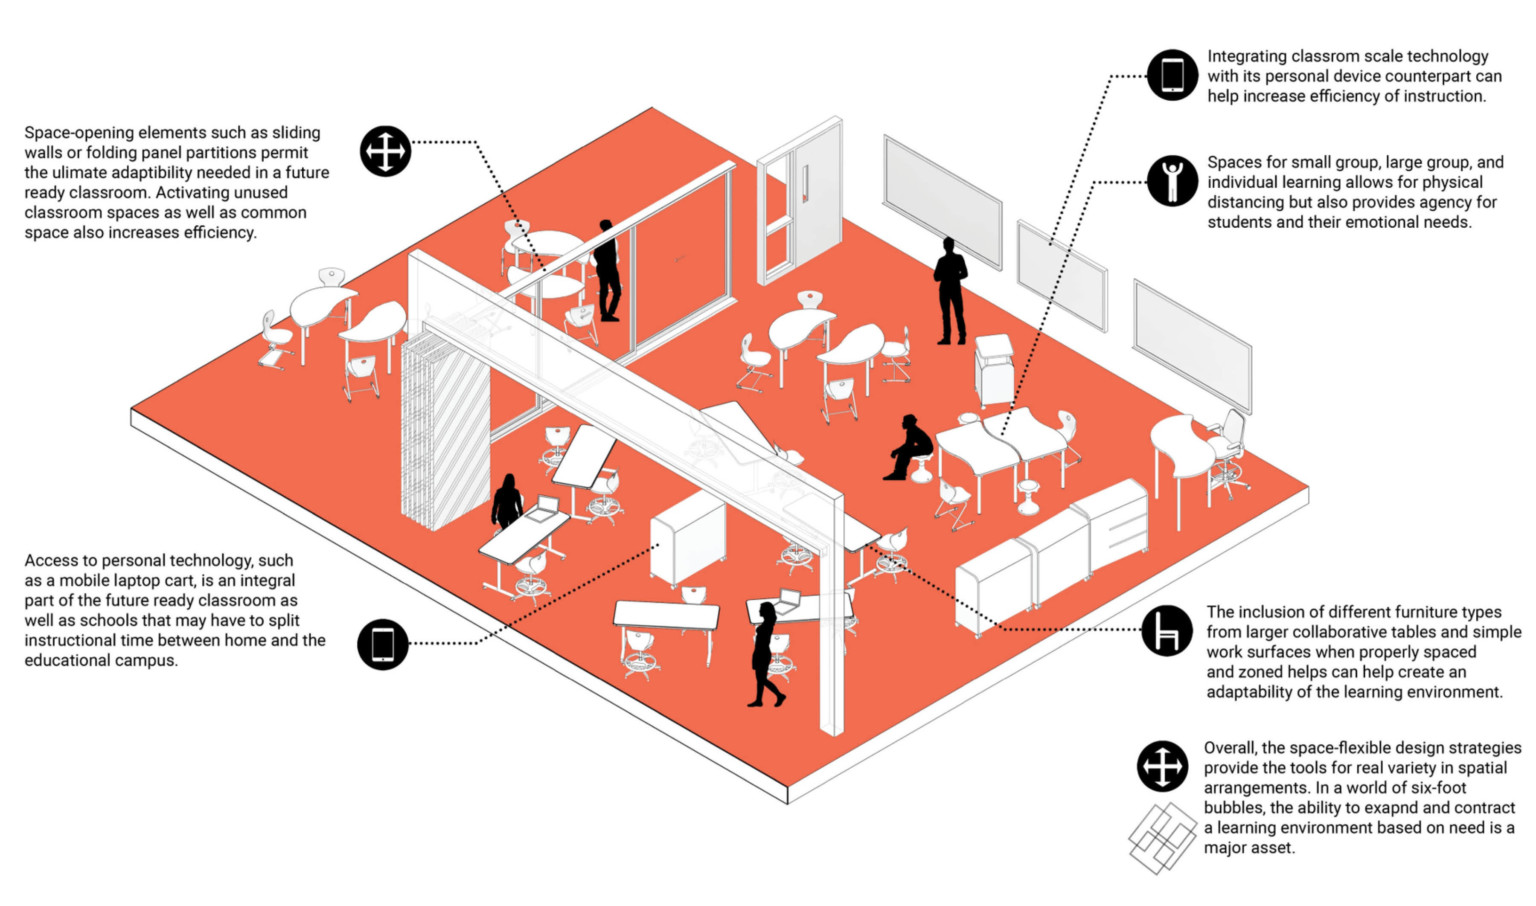 Aerial view of potential classroom solution using flexible walls and furniture to adapt the space to evolving needs